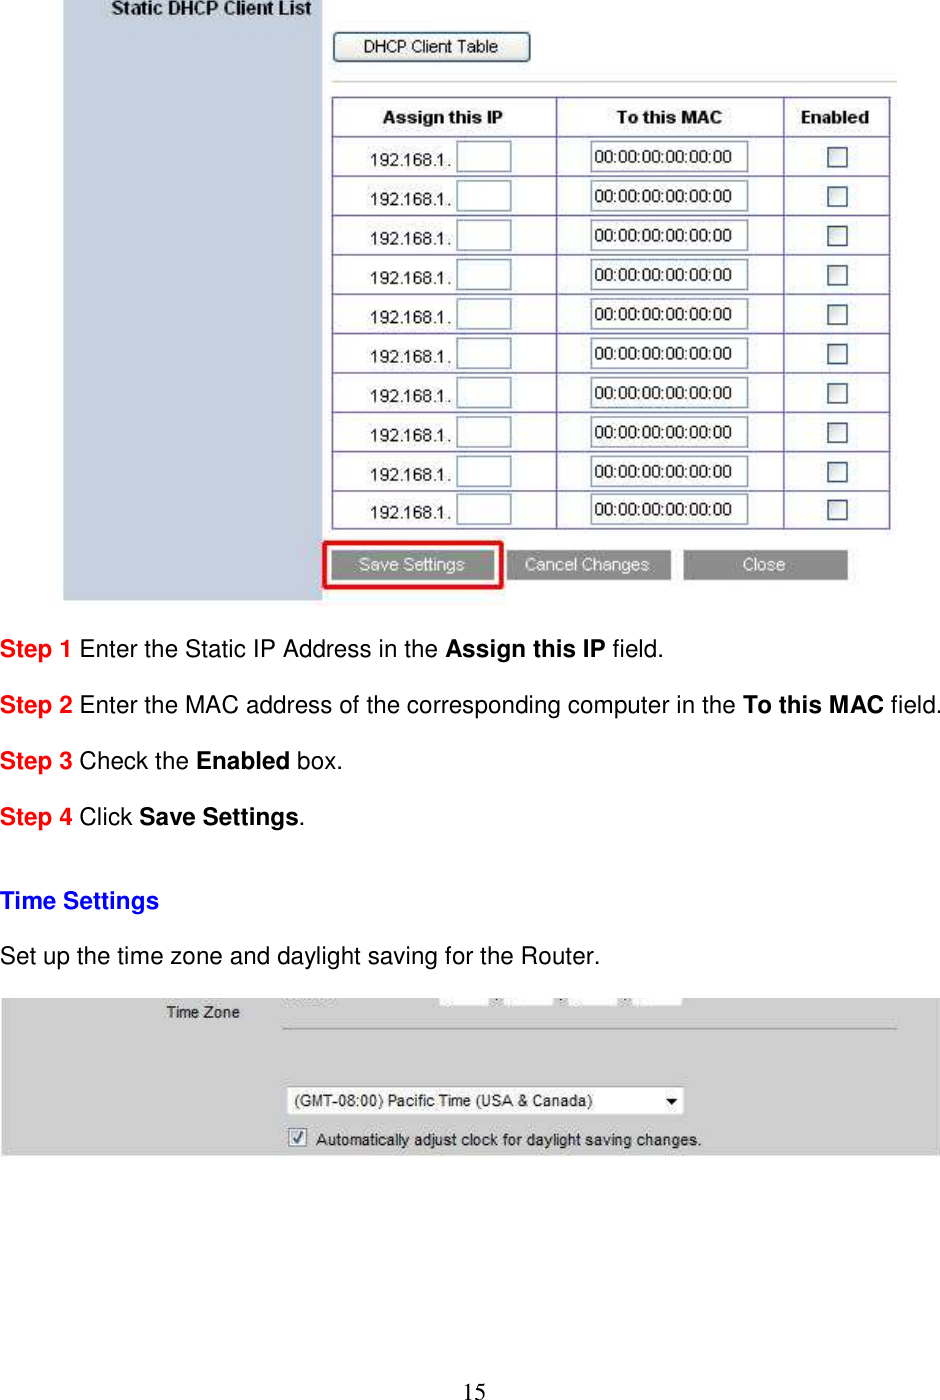 15   Step 1 Enter the Static IP Address in the Assign this IP field.  Step 2 Enter the MAC address of the corresponding computer in the To this MAC field.  Step 3 Check the Enabled box.  Step 4 Click Save Settings.   Time Settings   Set up the time zone and daylight saving for the Router.       